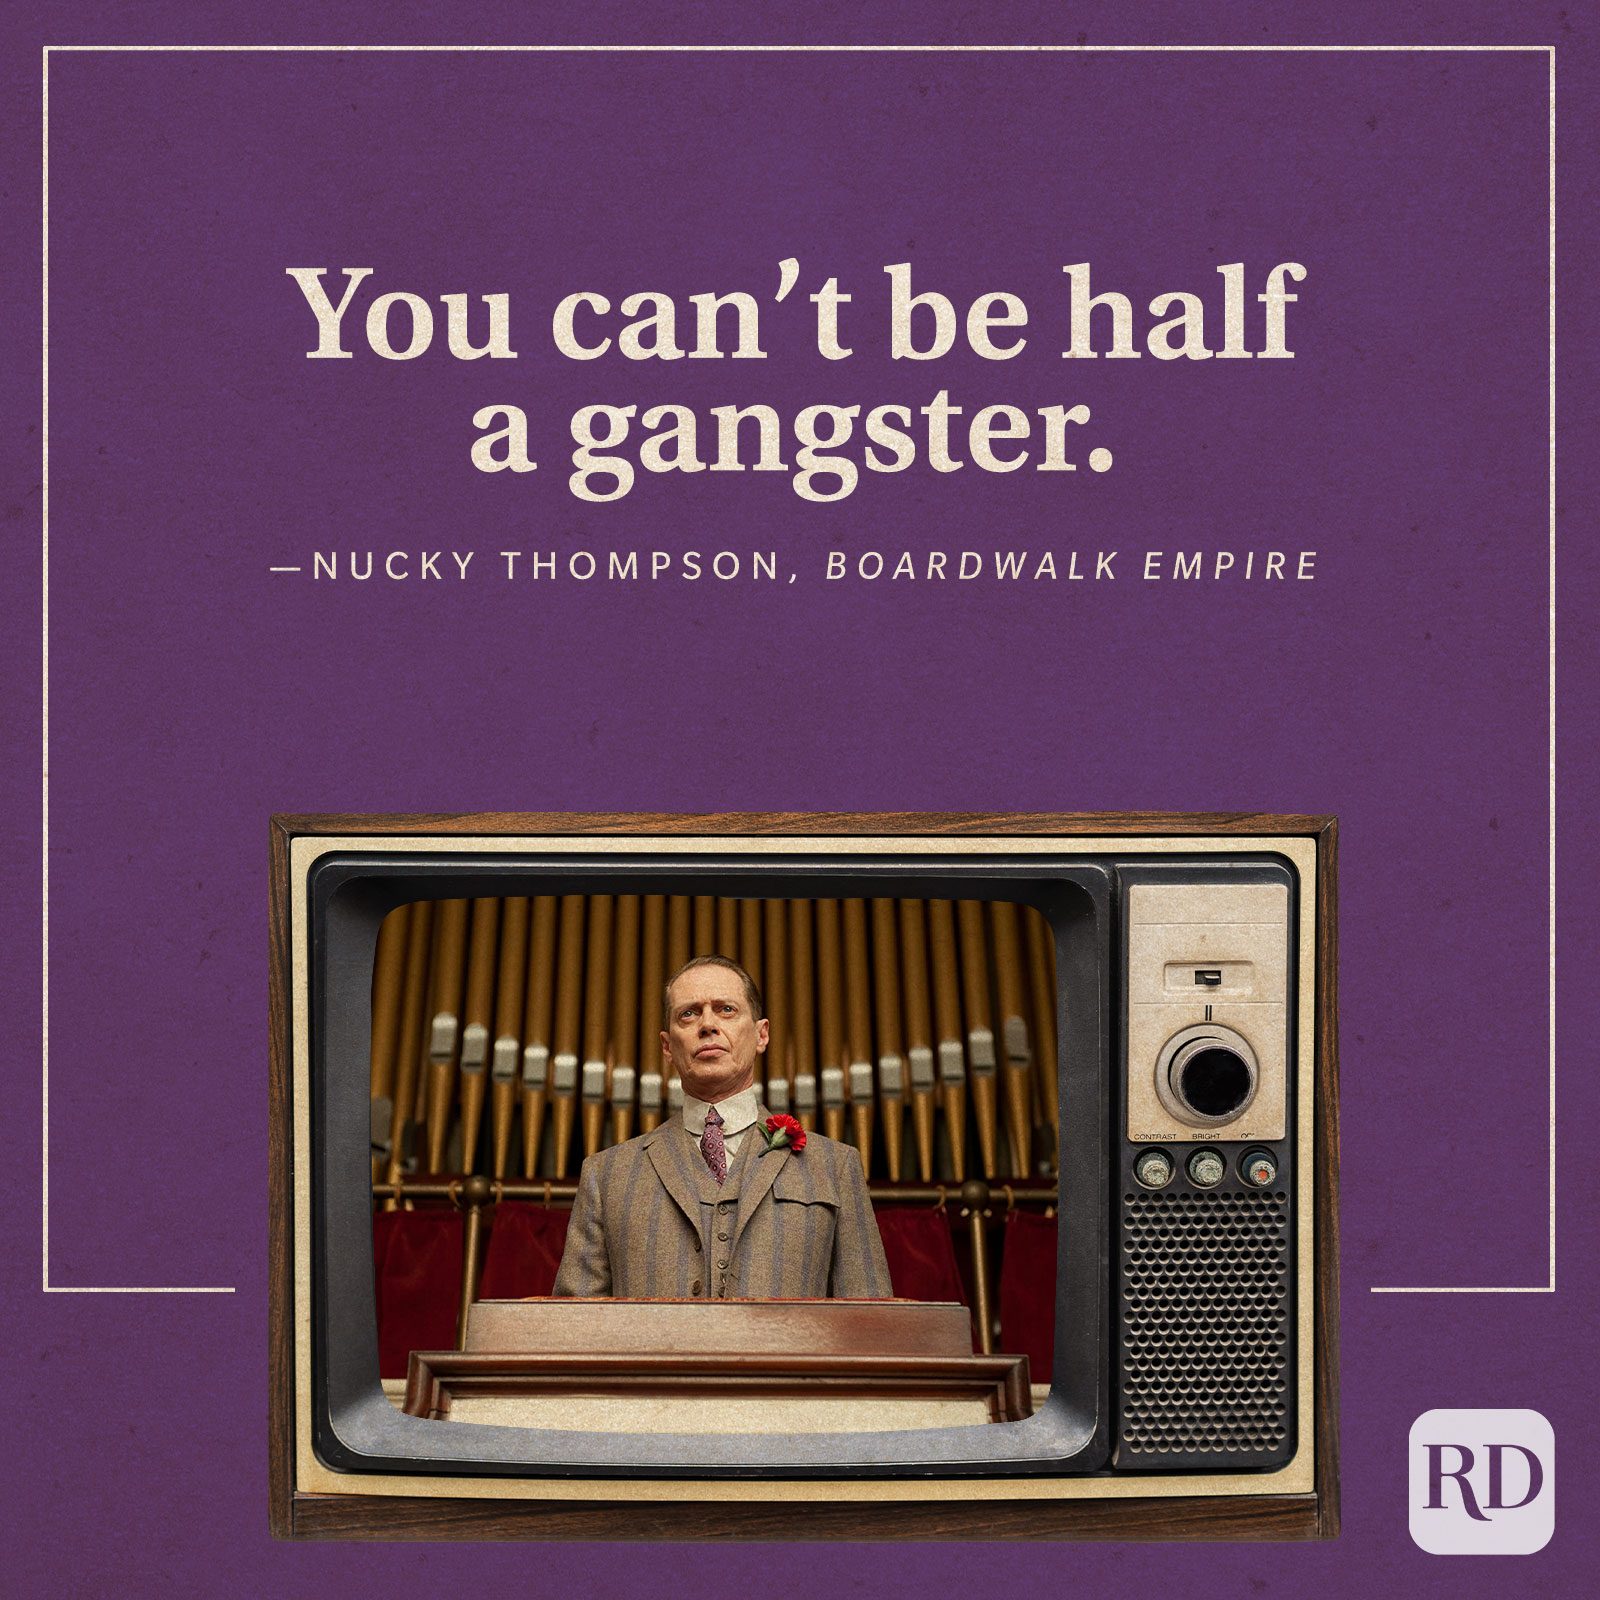  “You can’t be half a gangster.” -Nucky Thompson in Boardwalk Empire.